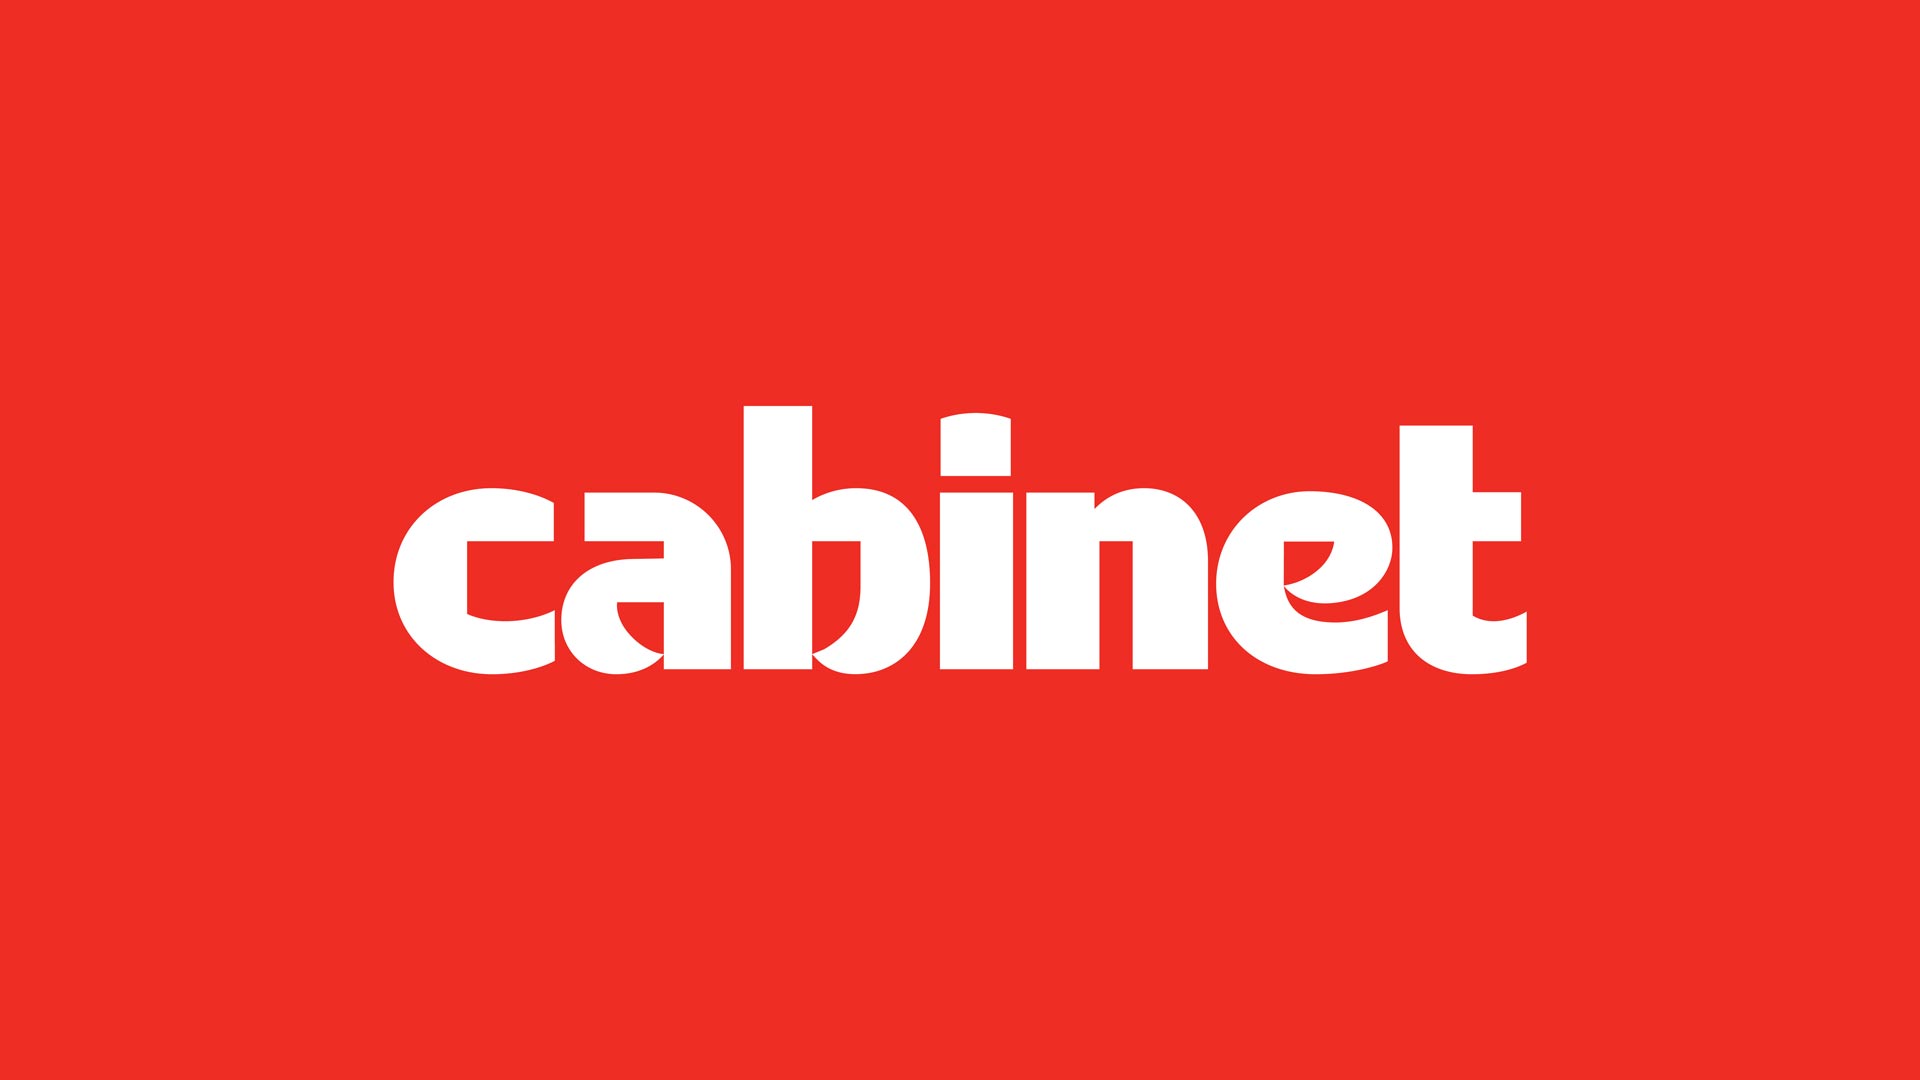 Cabinet logo, white type on red background